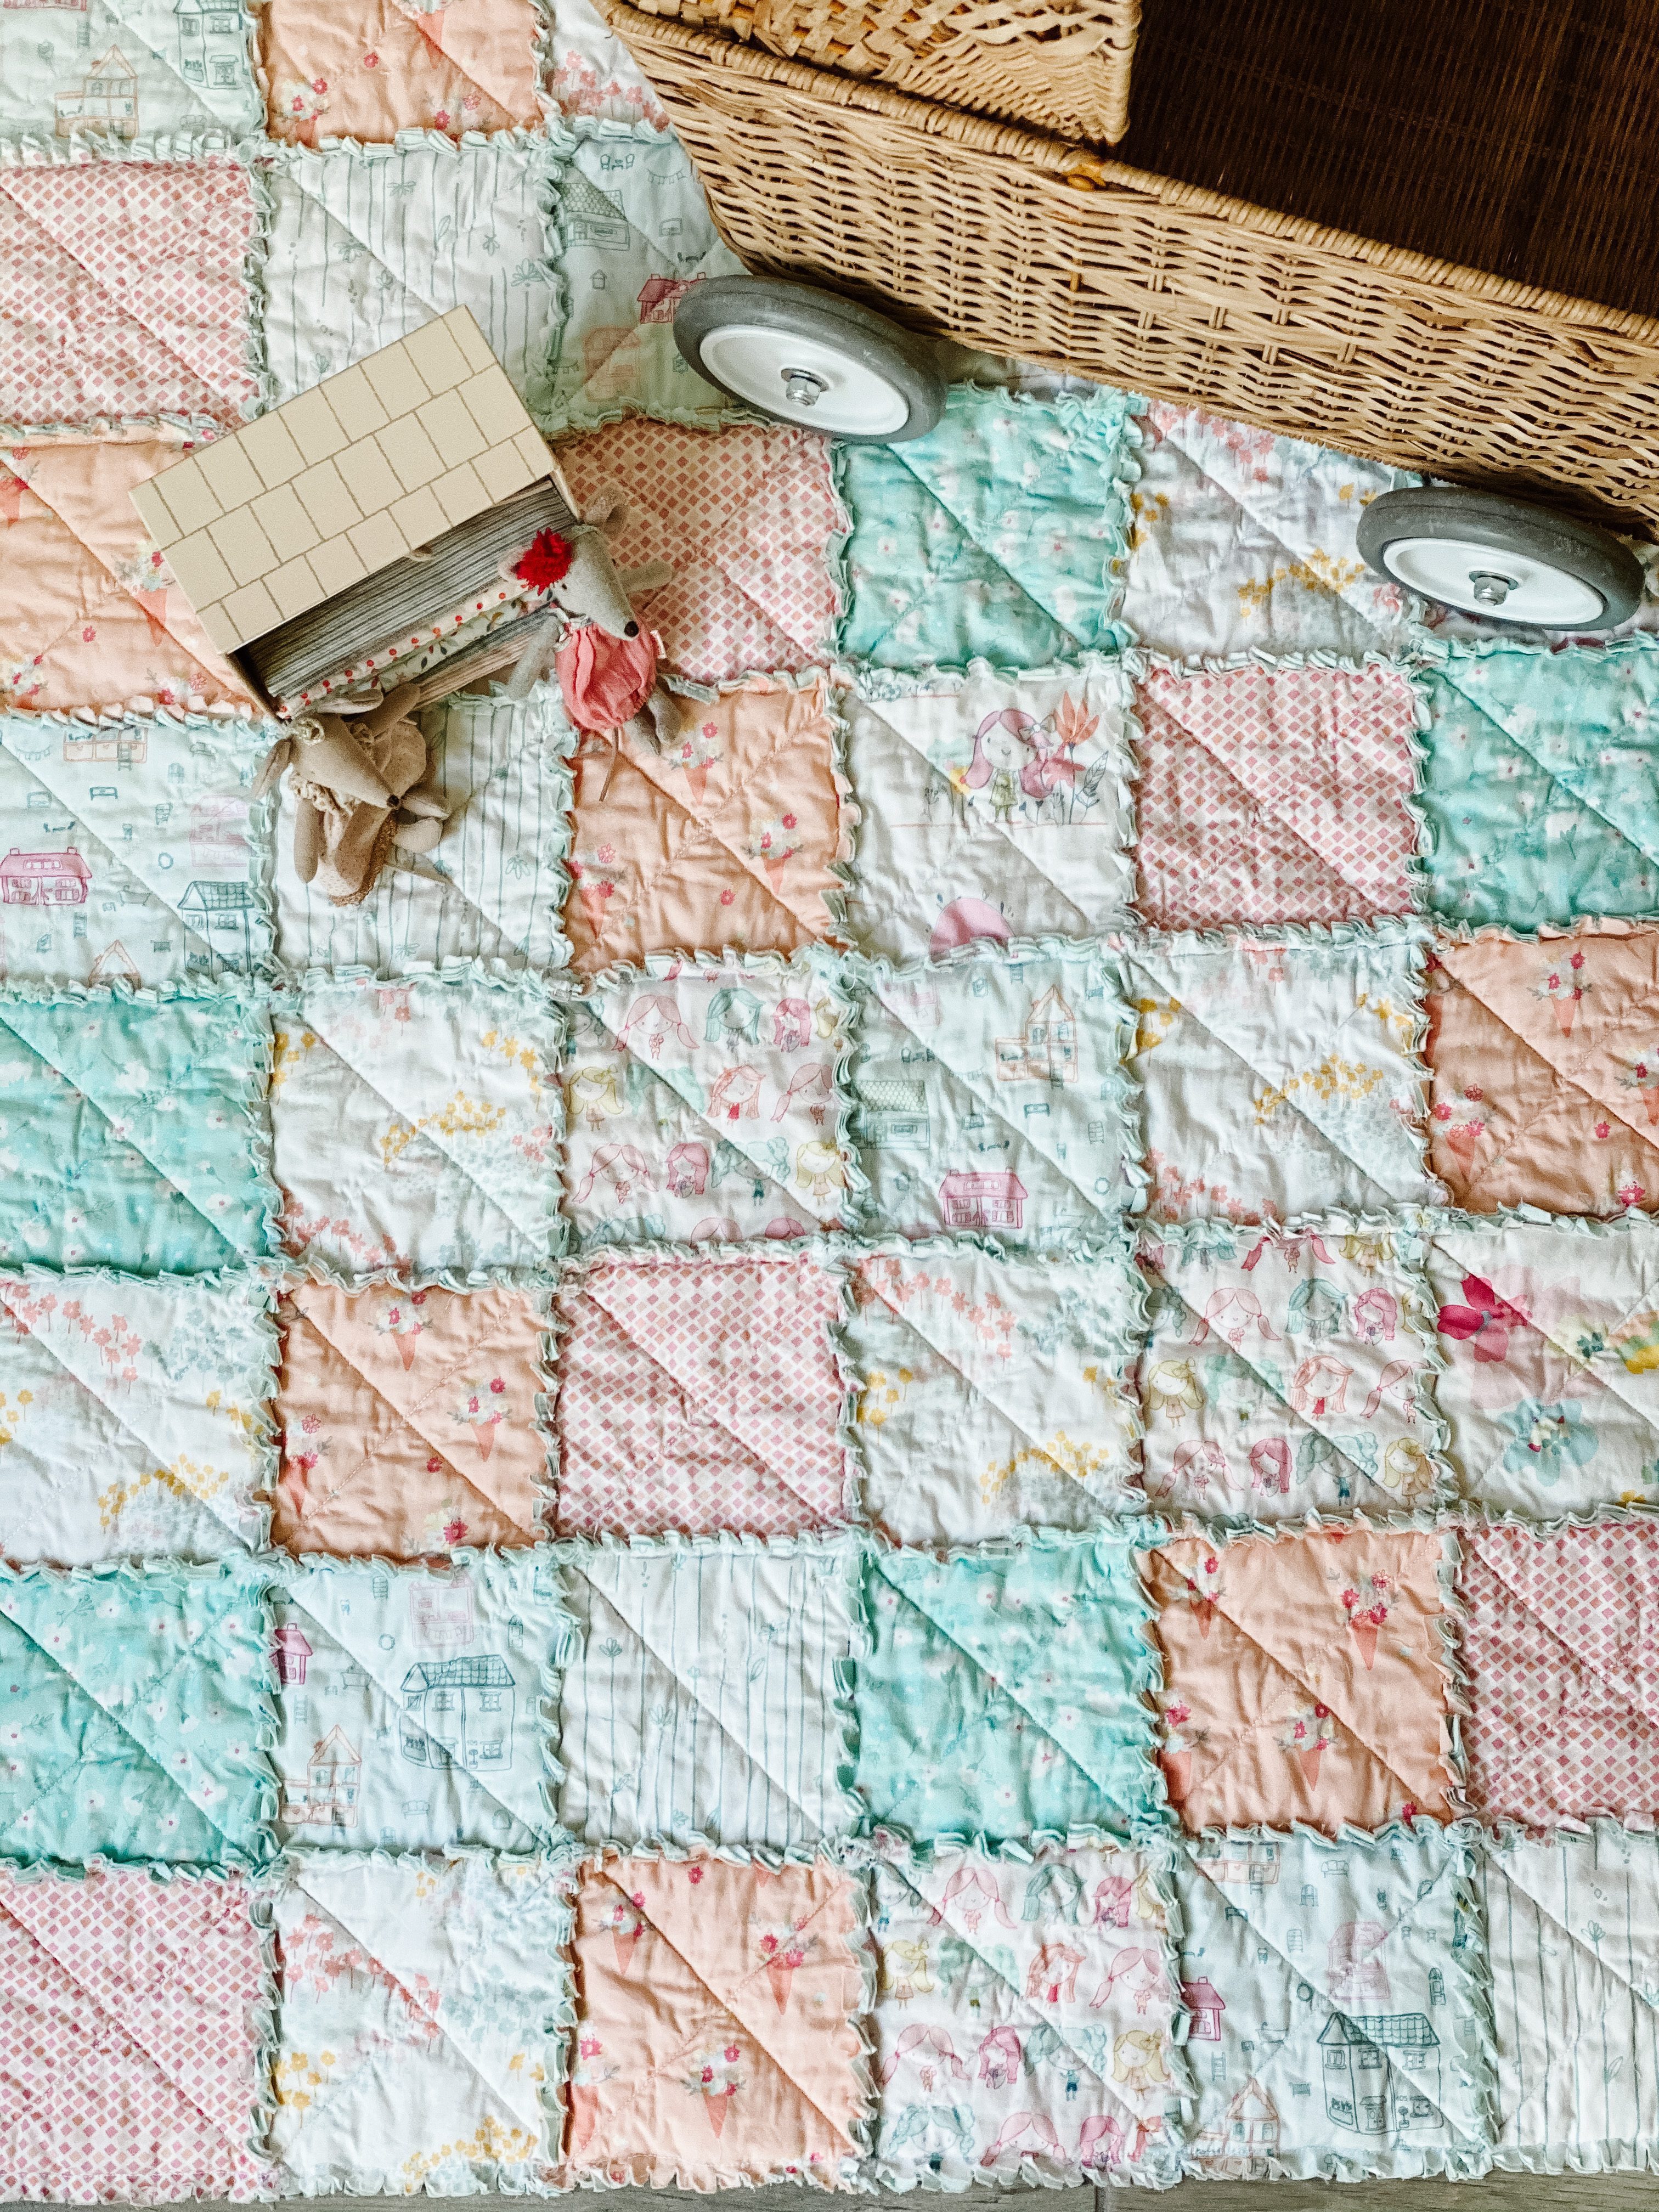 Making a rag quilt, the easiest beginner quilt